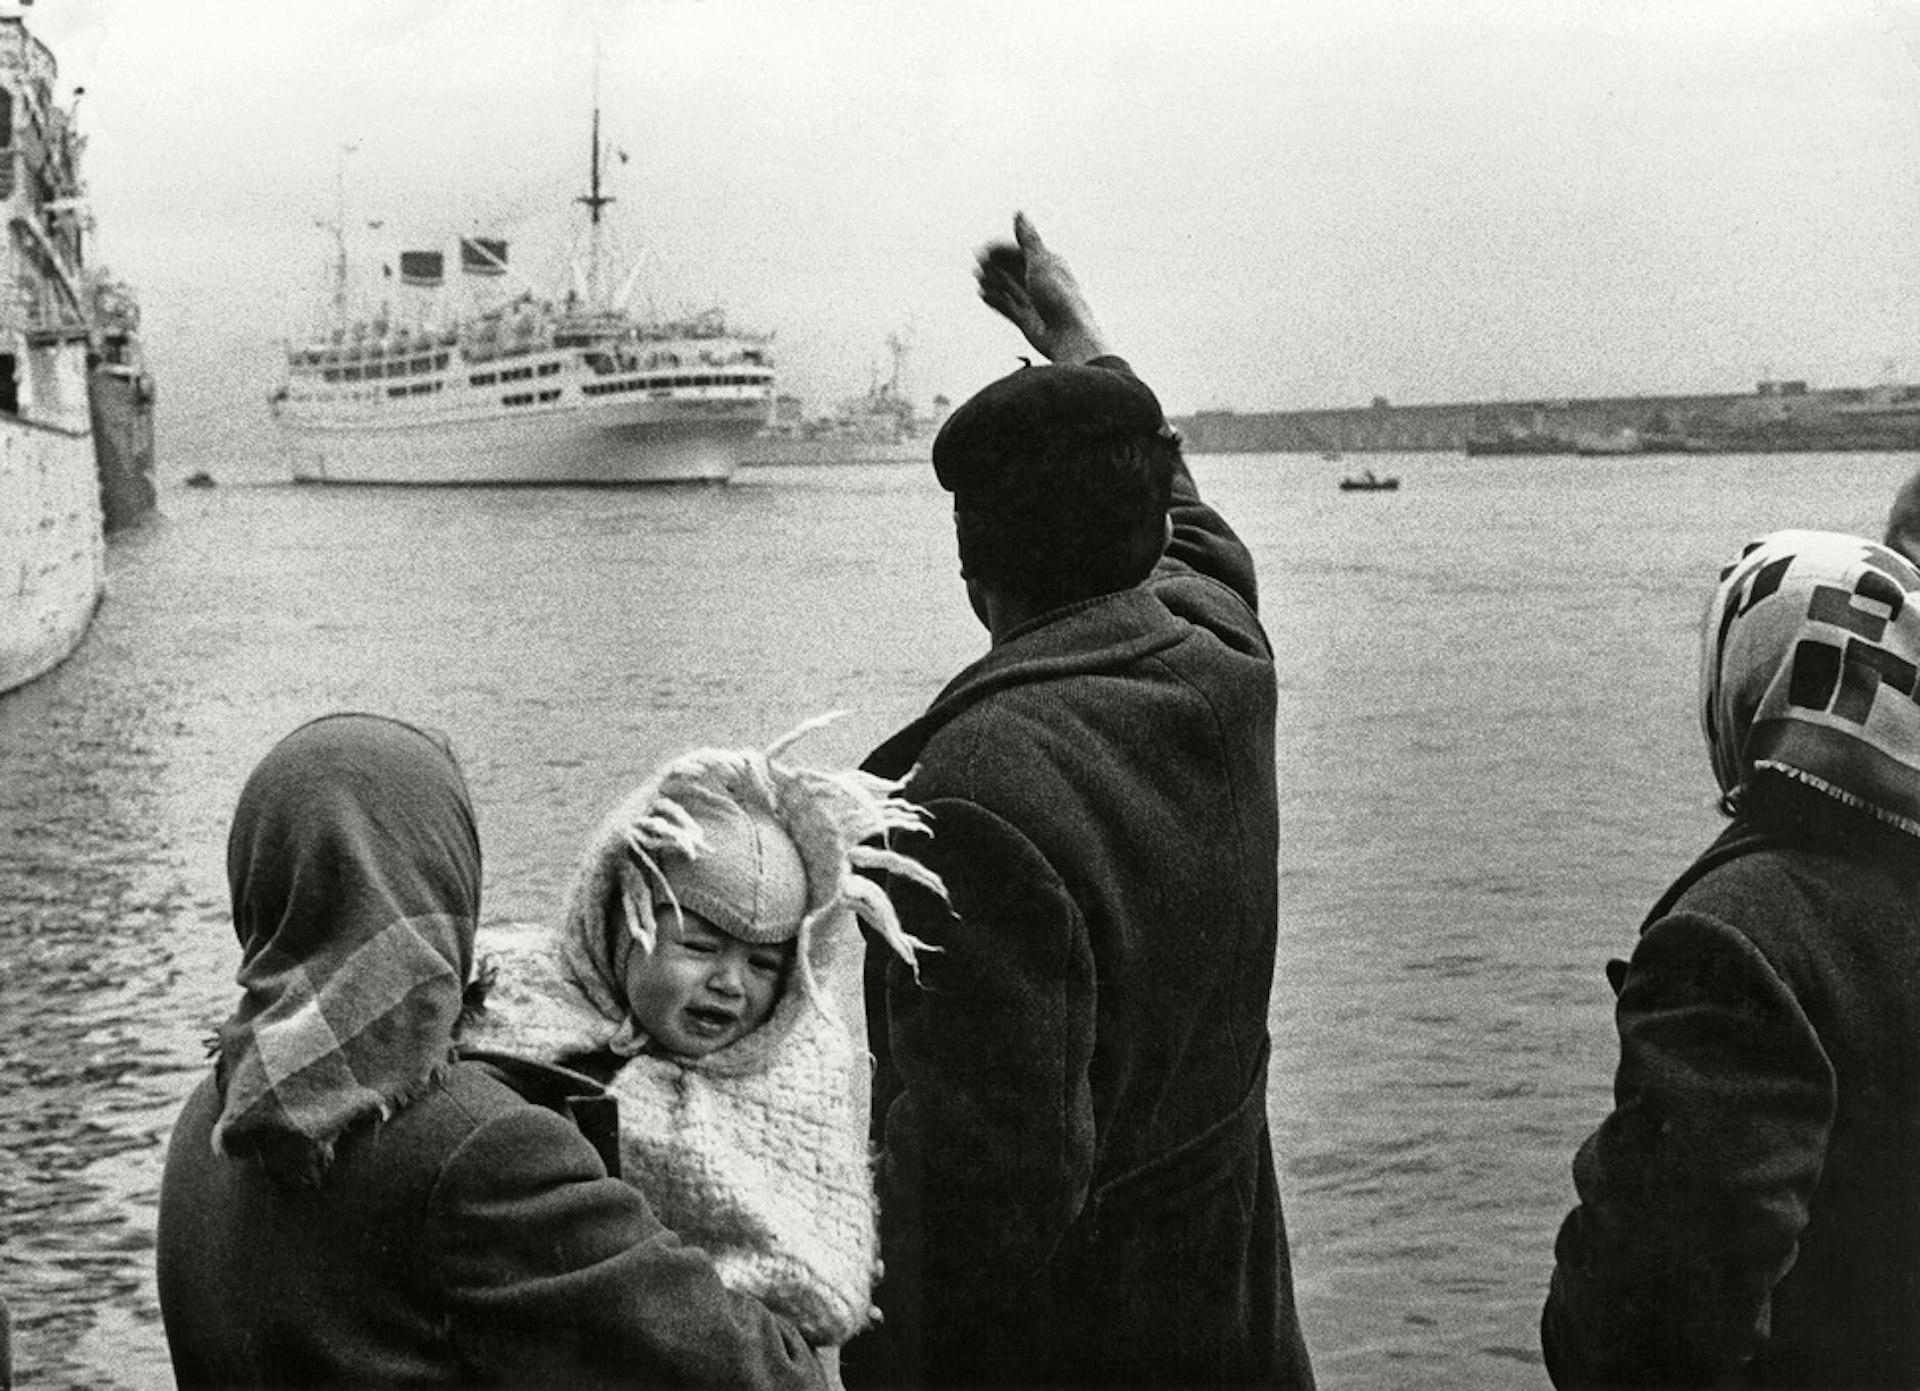 Magnum photographers past and present collaborate on a guide to Europe for refugees